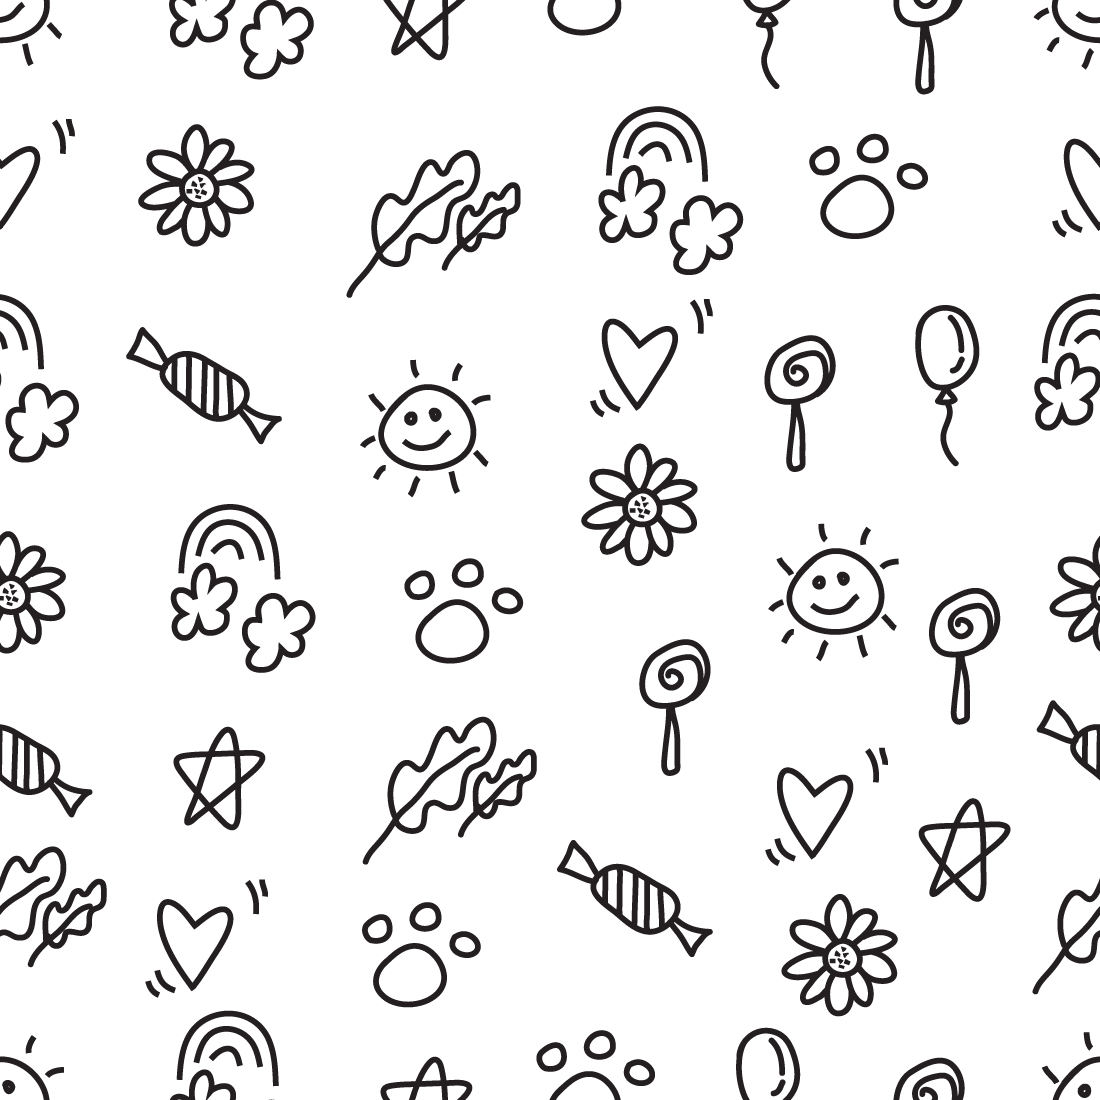 social media icon doodle seamless pattern background hand drawing